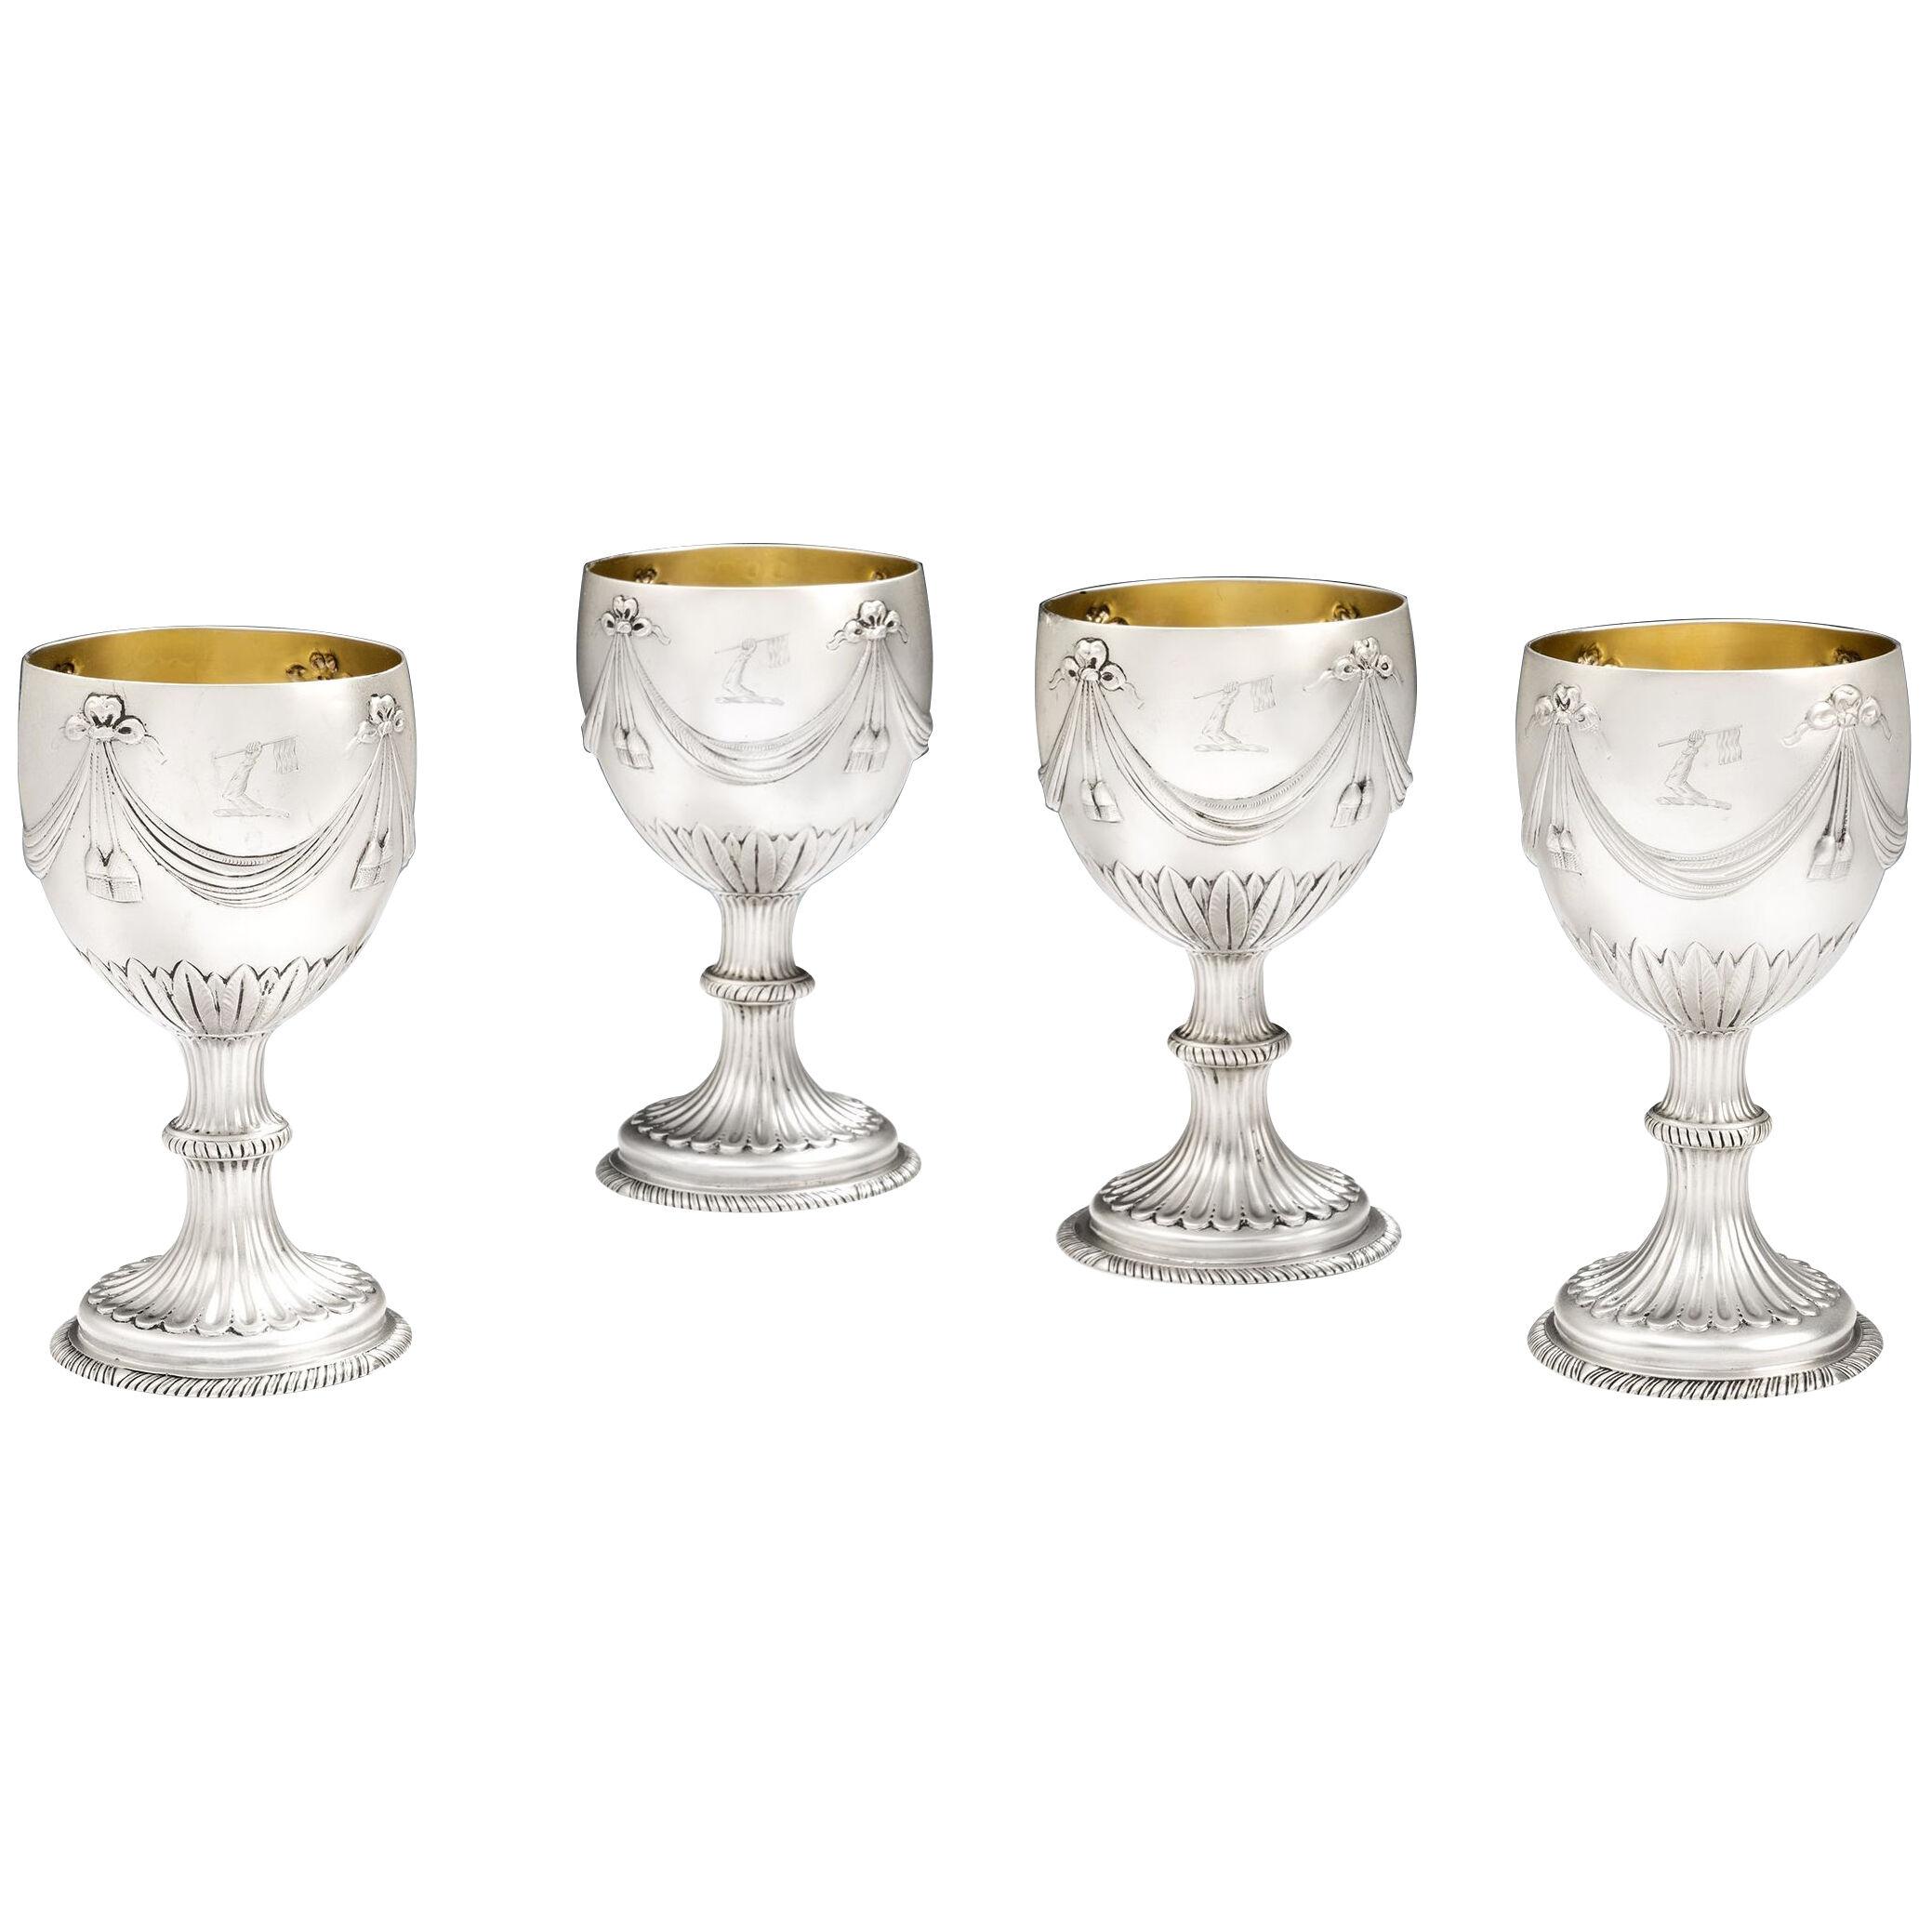 Four George III Drinking Goblets made in London in 1777 by William Turton.